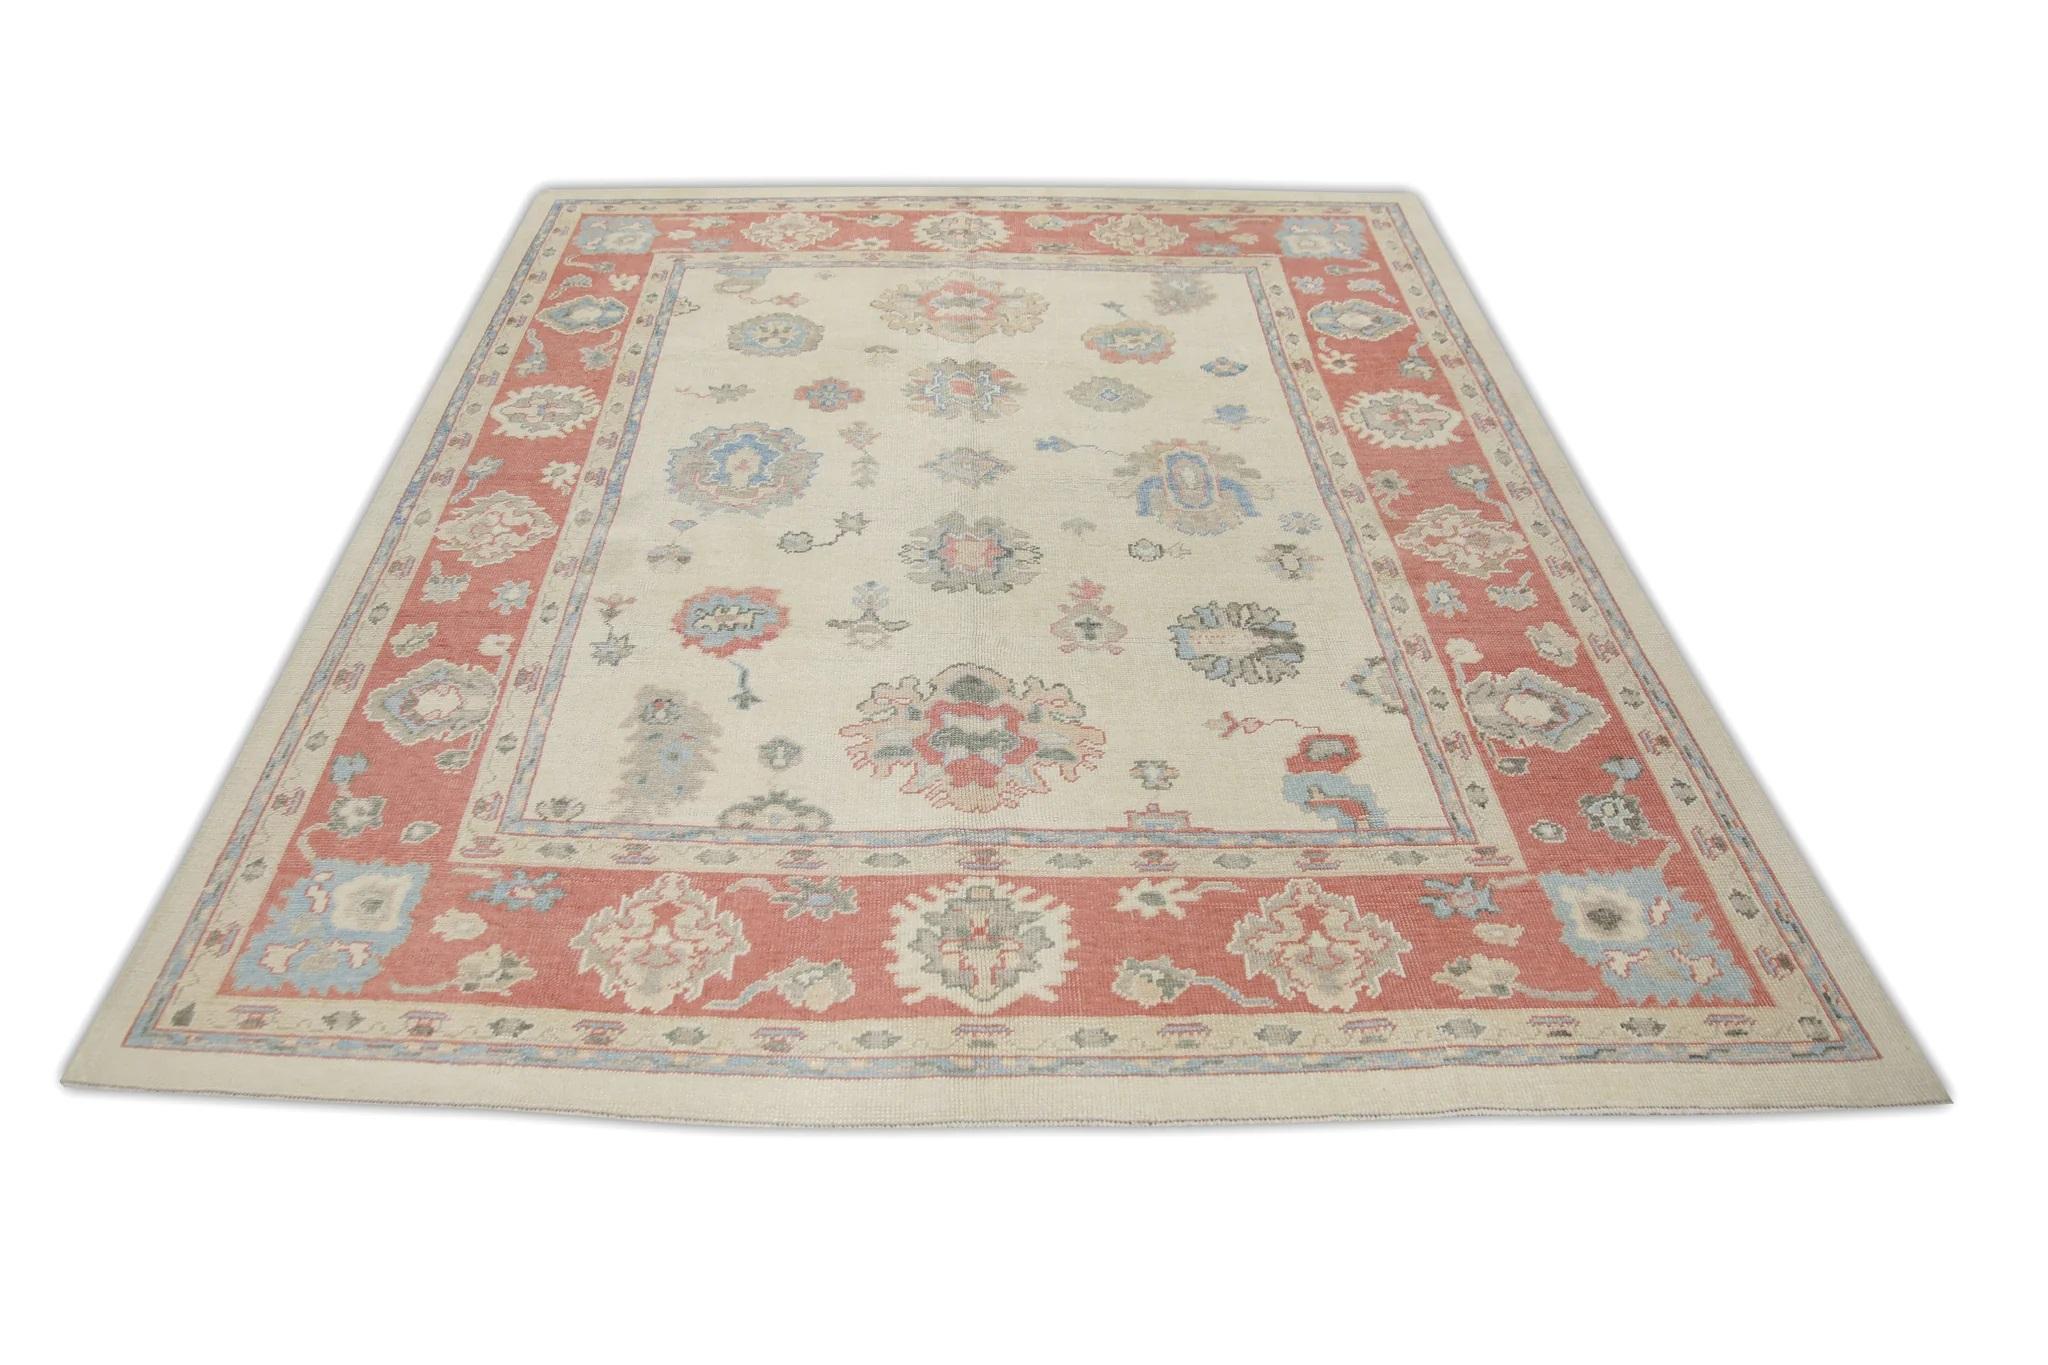 Contemporary Cream Handwoven Wool Turkish Oushak Rug in Red & Blue Floral Design 8'3